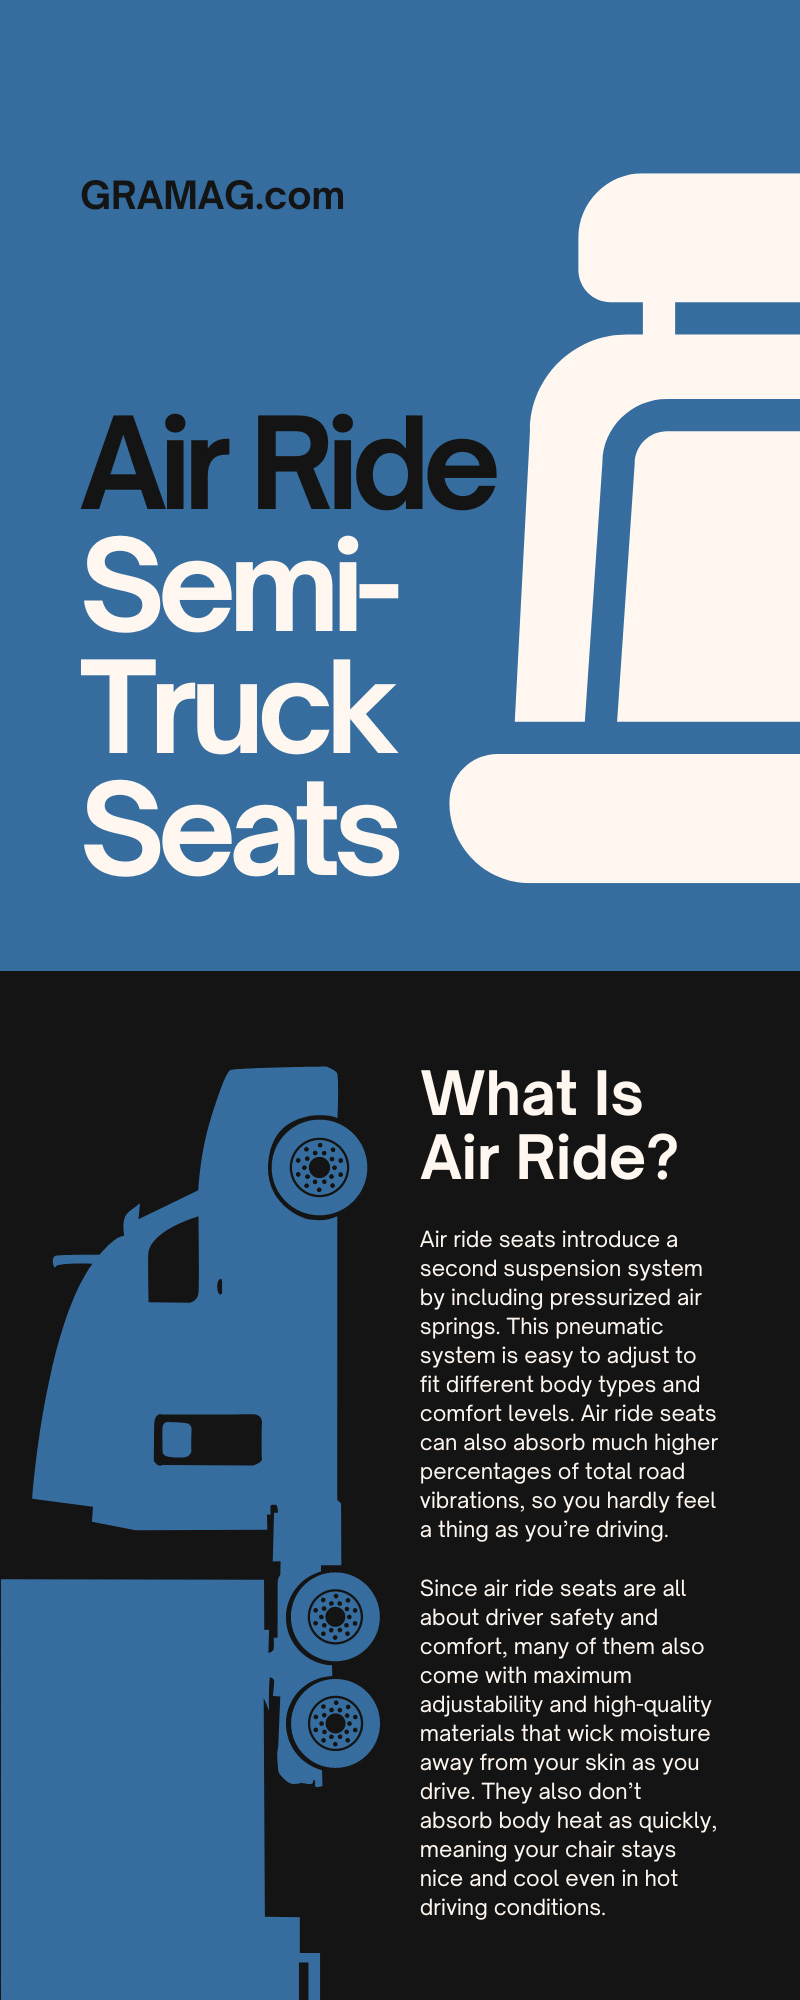 Air Ride Semi-Truck Seats: How Do They Work?